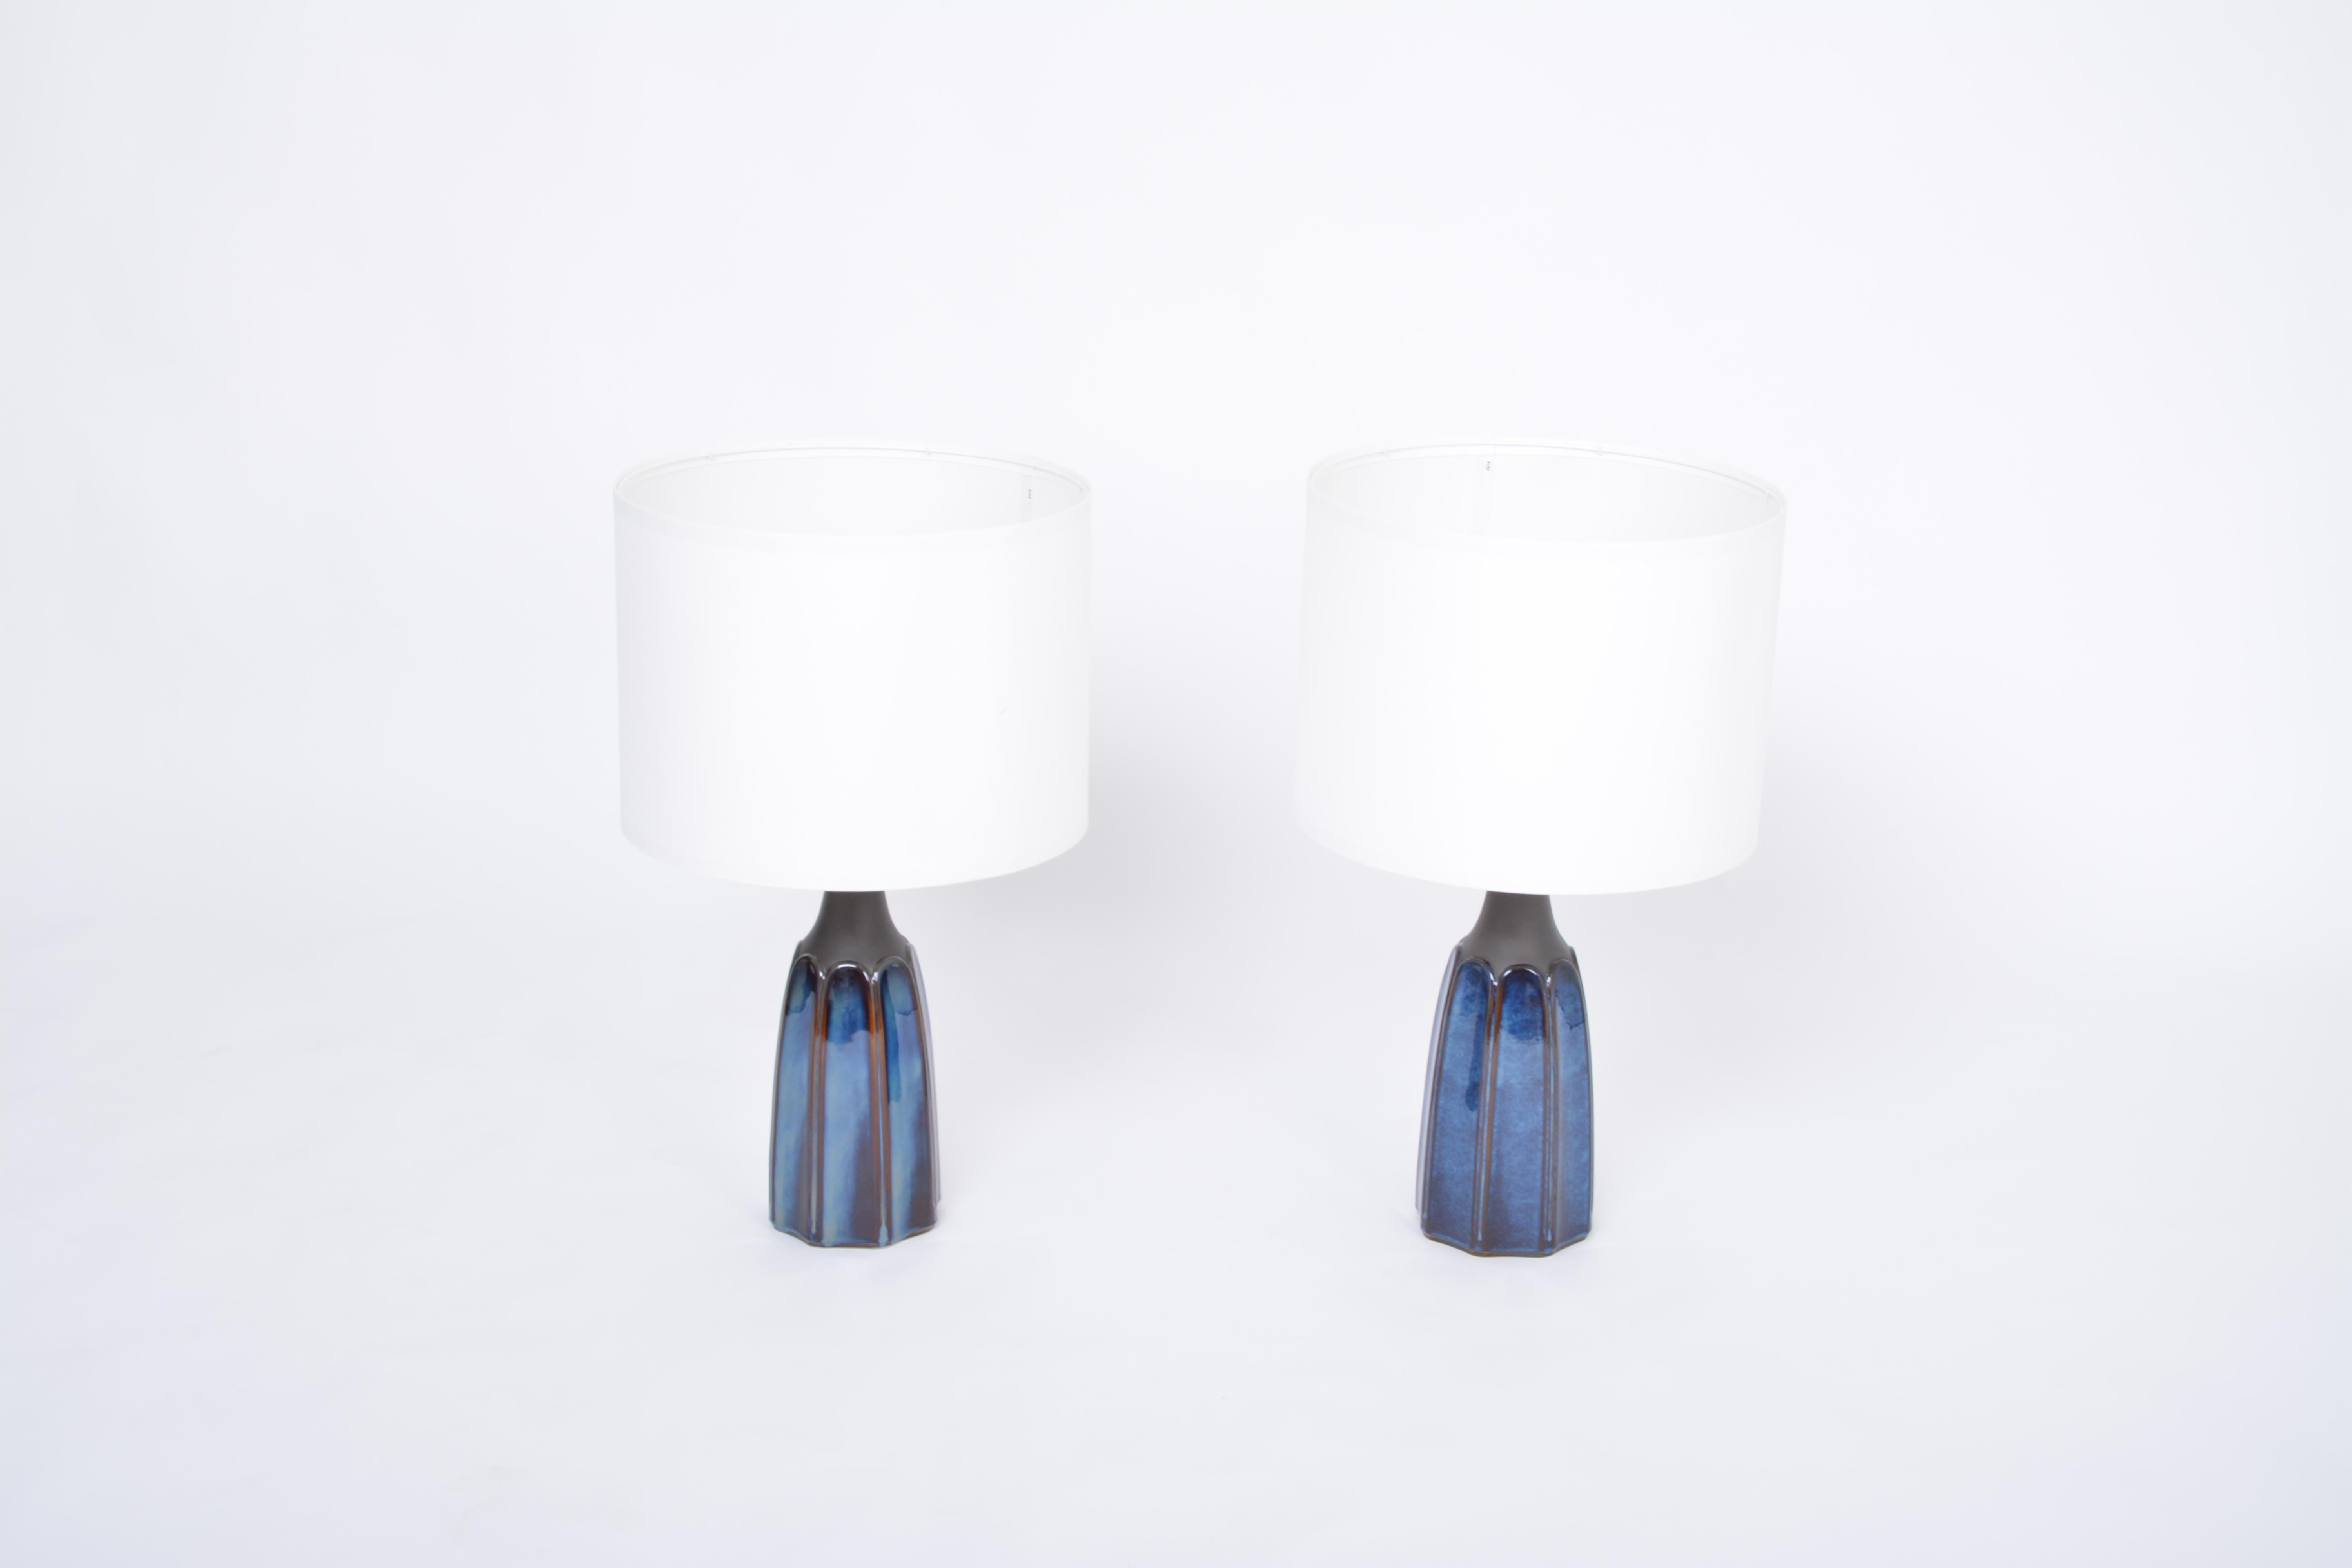 Pair of tall blue stoneware table lamps model 1042 by Einar Johansen for Søholm

Pair of table lamps made of stoneware with blue ceramic glazing to the base of the lamps. Designed by Einar Johansen and produced by Danish company Soholm. The base